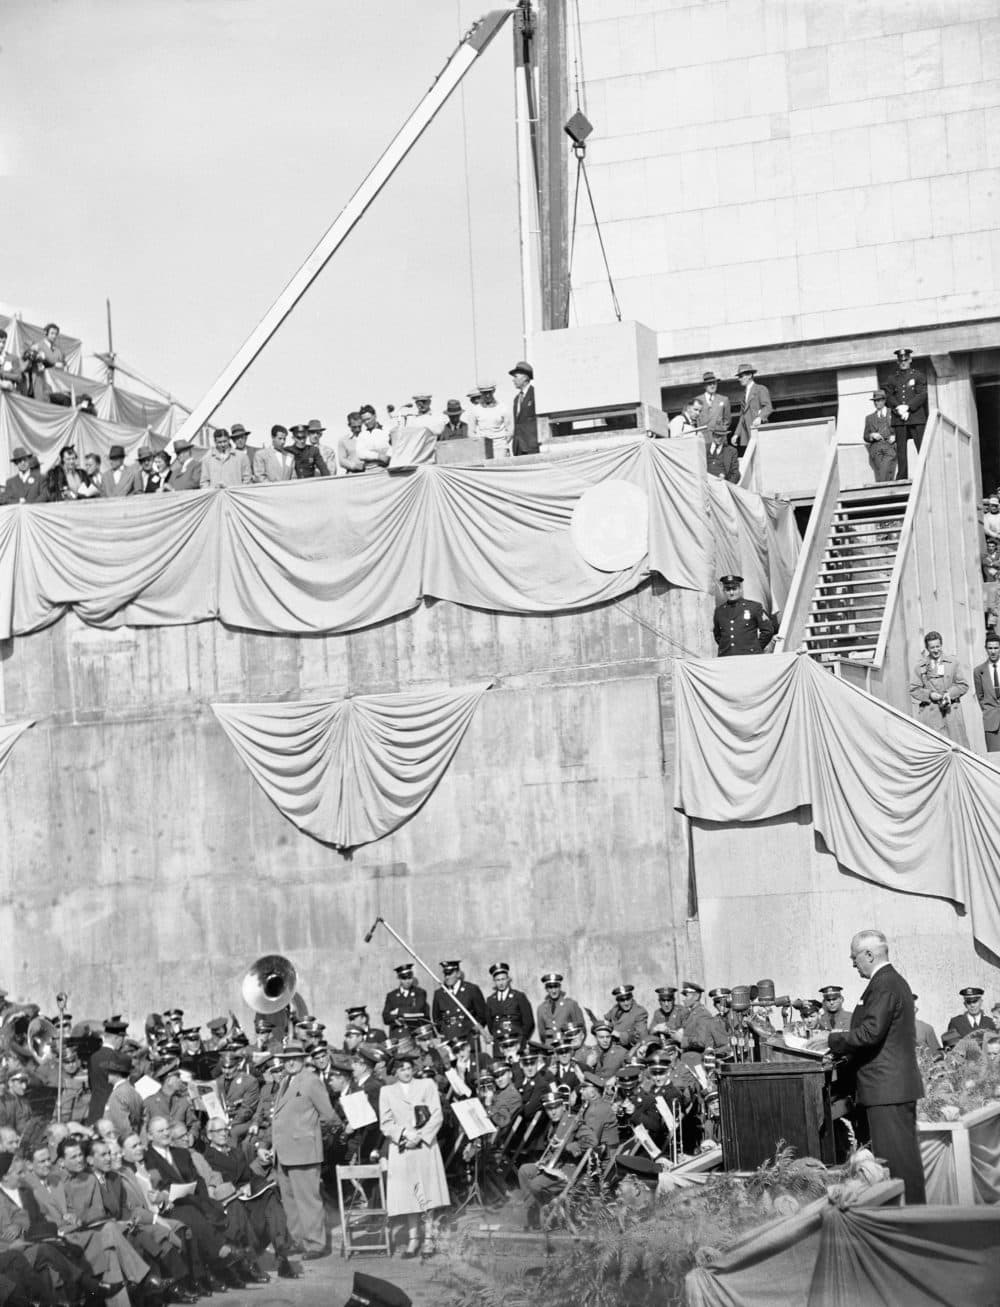 President Harry S. Truman (right), delivers a foreign policy speech at the cornerstone laying ceremony for the United Nations permanent headquarters on Oct. 24, 1949 in New York City.   High above musicians is the cornerstone which was lowered into place over a receptacle containing a copy of the U.N. charter and the U.N. declaration of human rights. (AP)